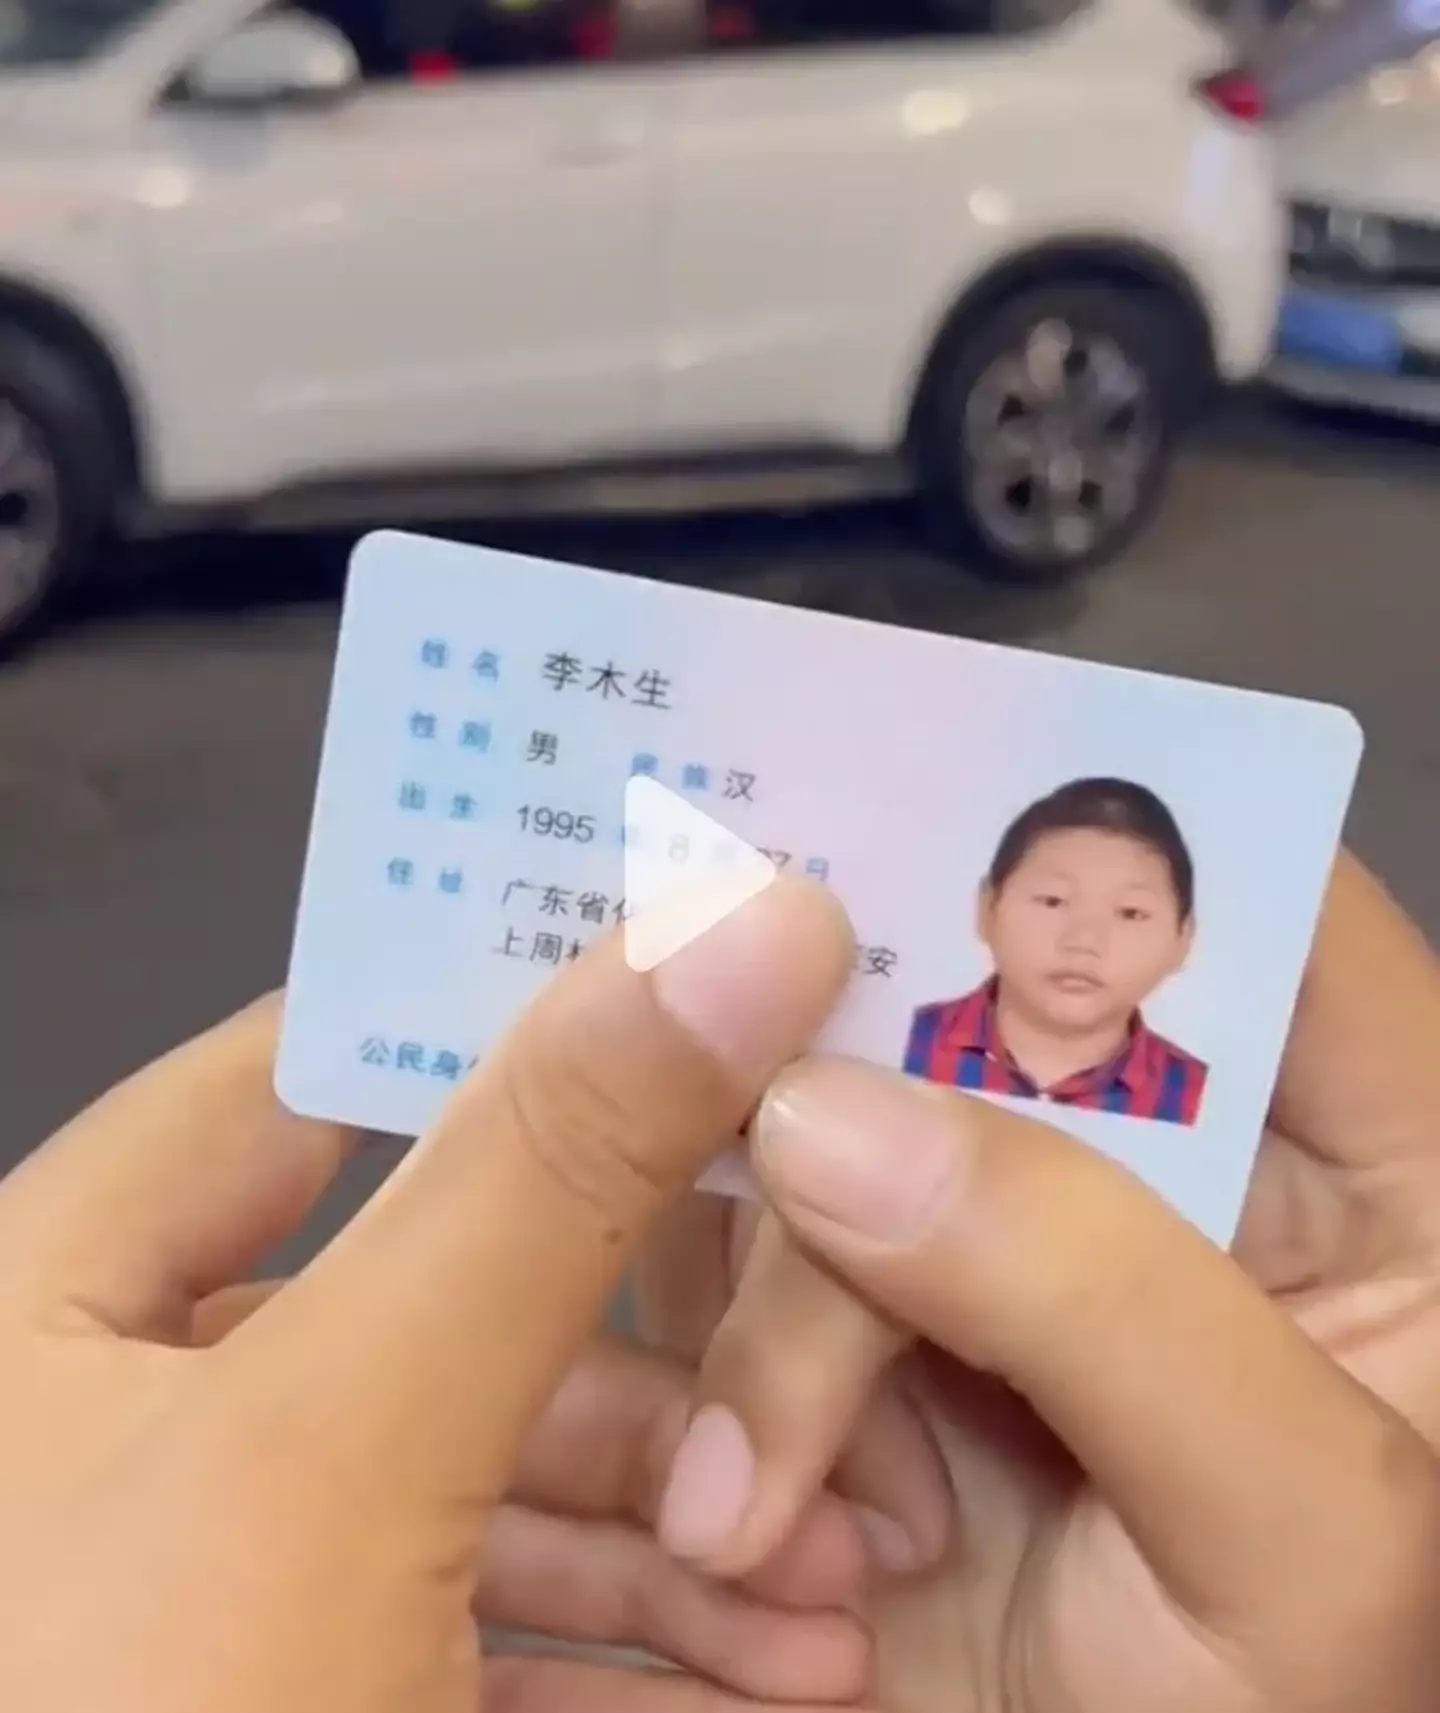 Mao's ID says he was born in 1995.